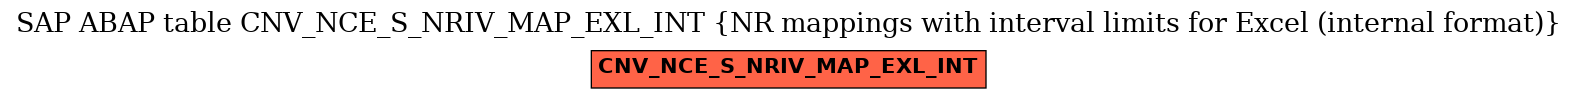 E-R Diagram for table CNV_NCE_S_NRIV_MAP_EXL_INT (NR mappings with interval limits for Excel (internal format))